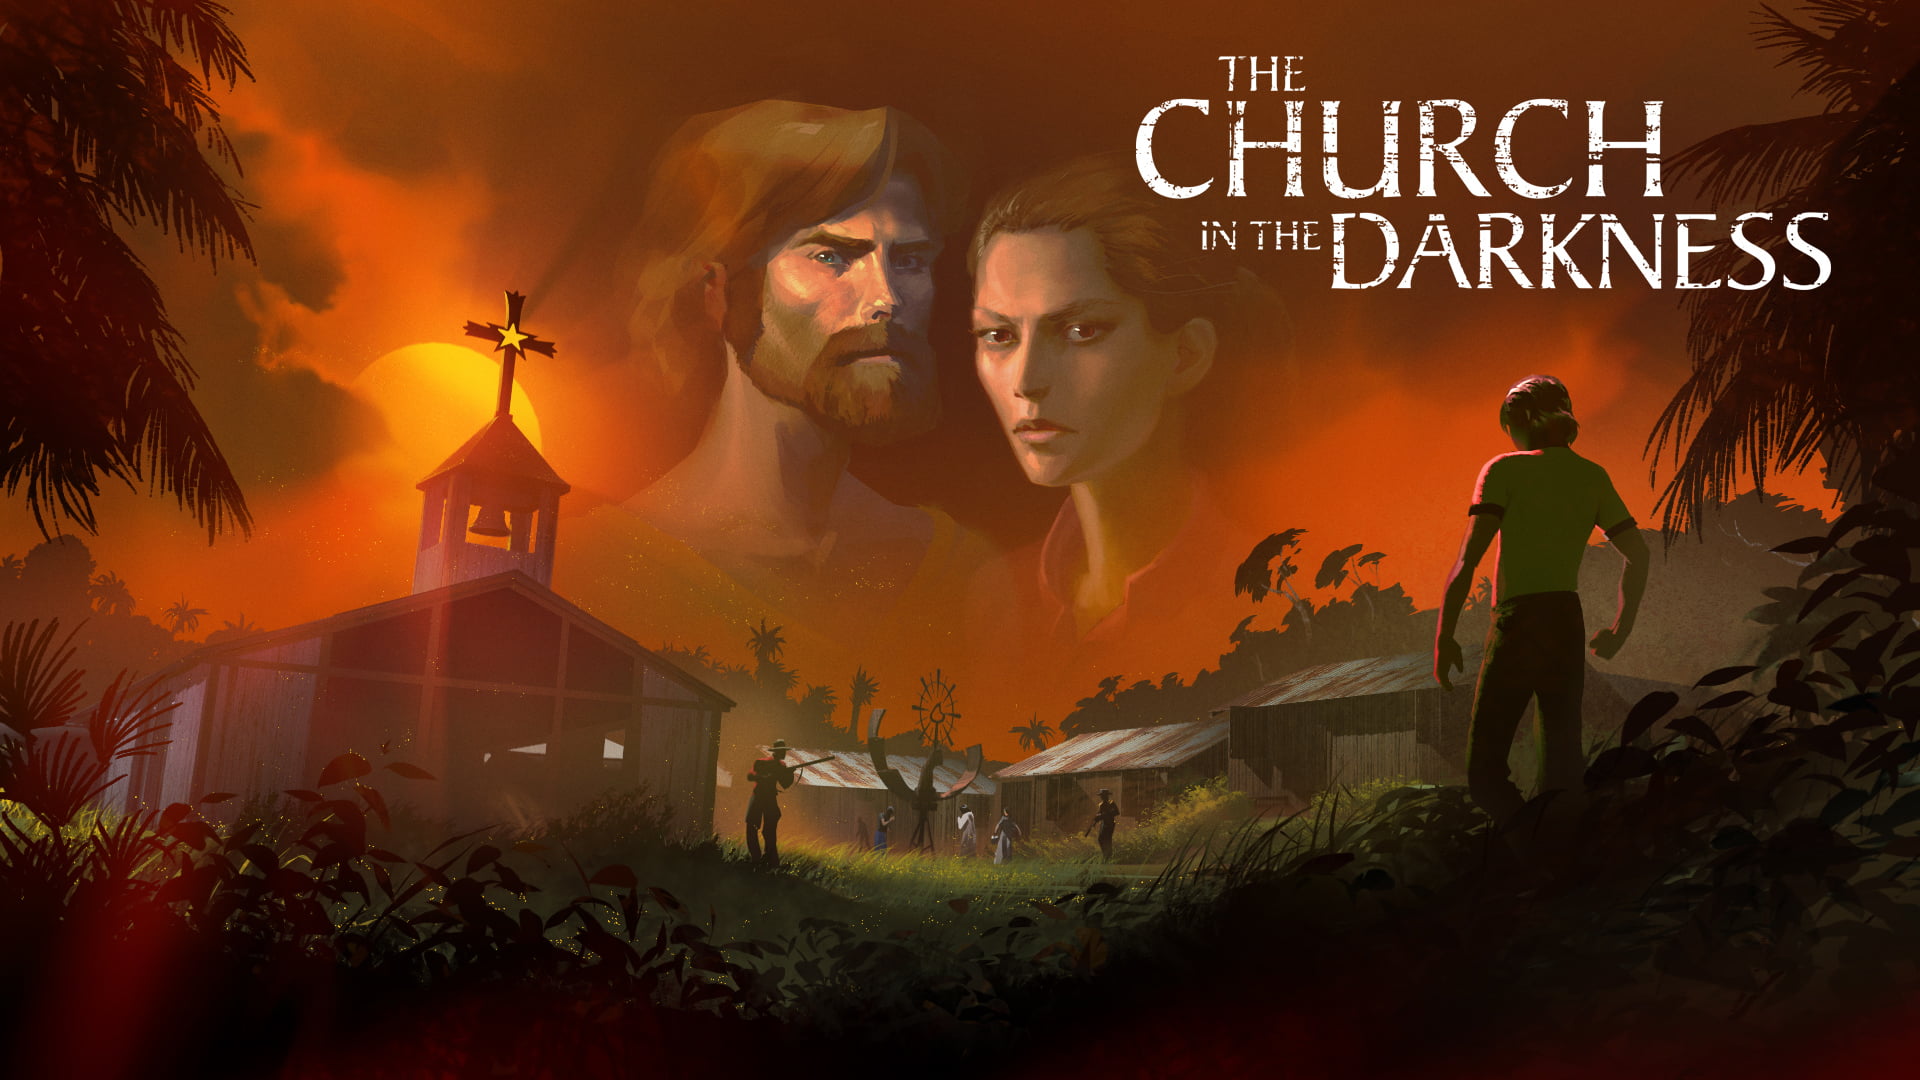 Felix the reaper | the church in the darkness - review | the church in the darkness | notícias